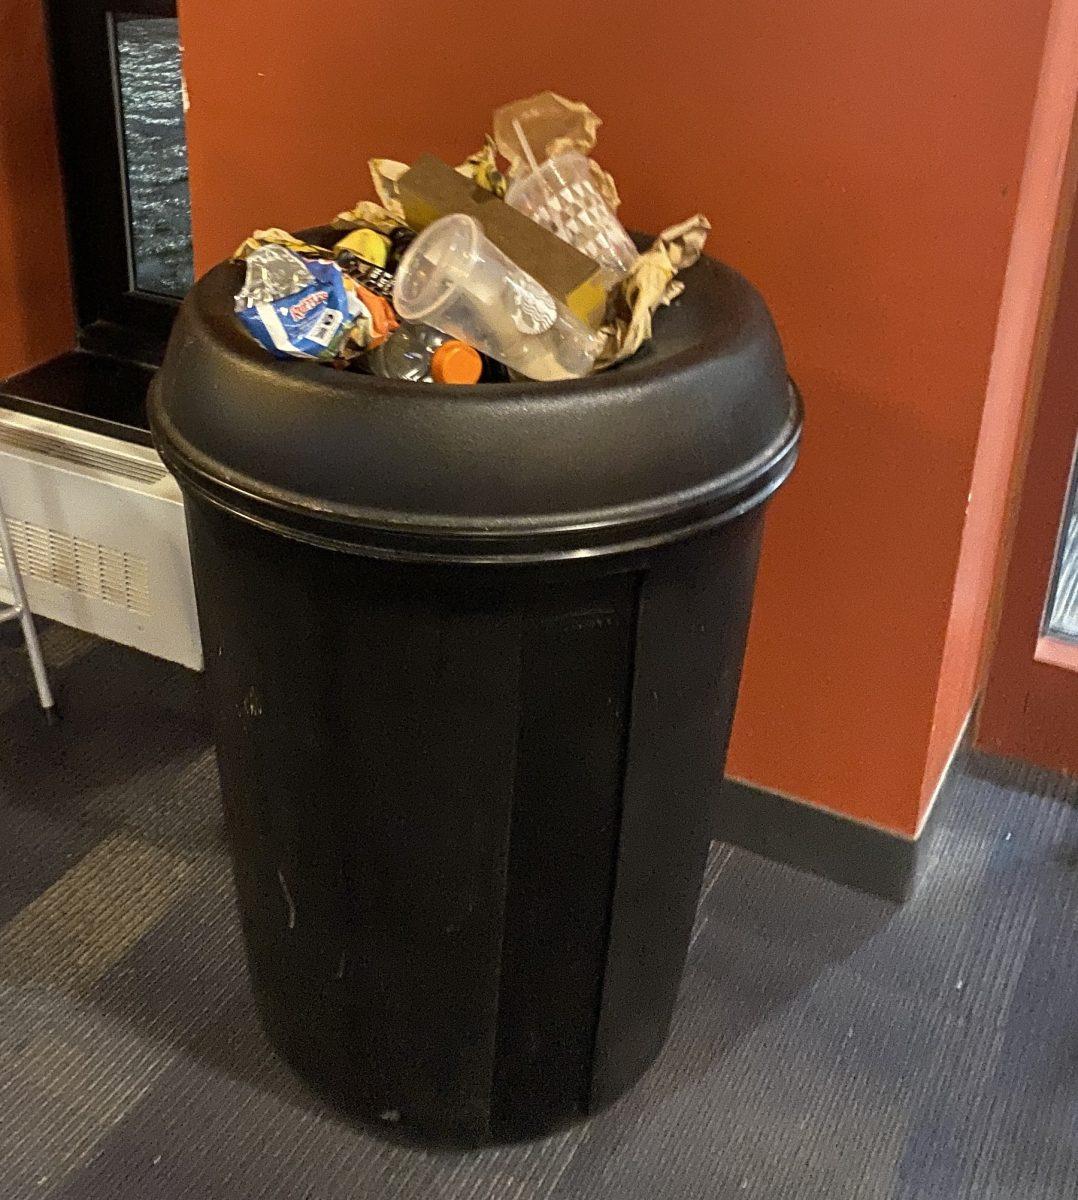 A trash can overflowing in Merion Hall at 5:57 p.m. Jan. 17. PHOTO: THE HAWK